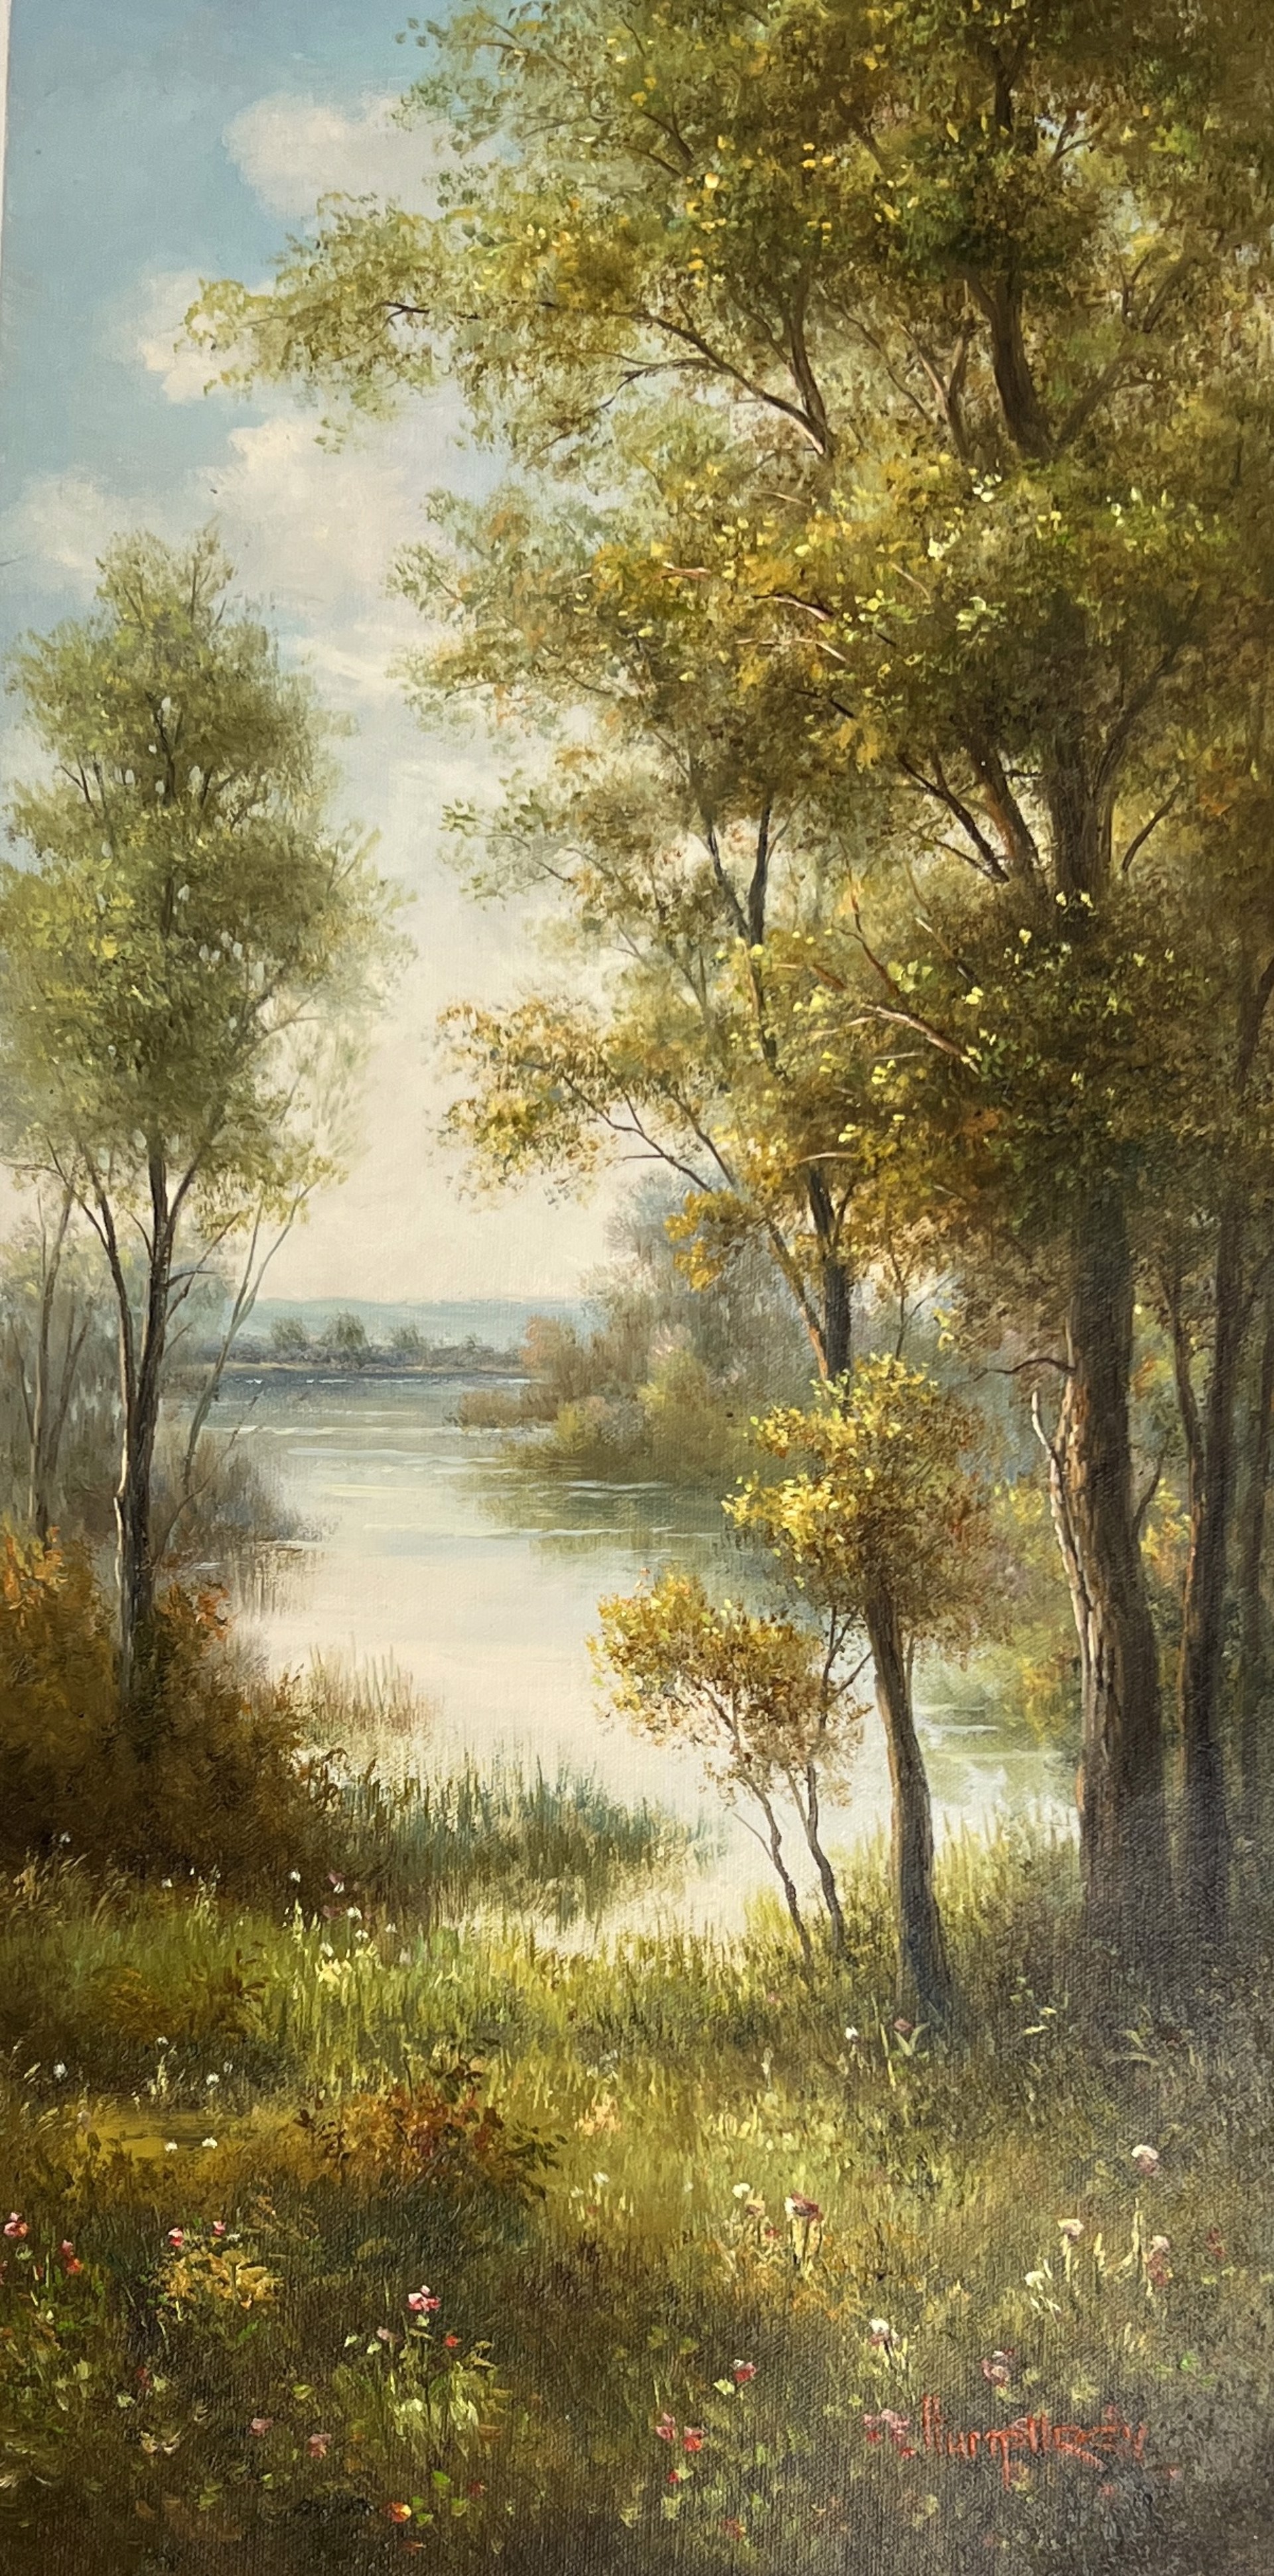 VIEW FROM THE INLET by HUMPHREY